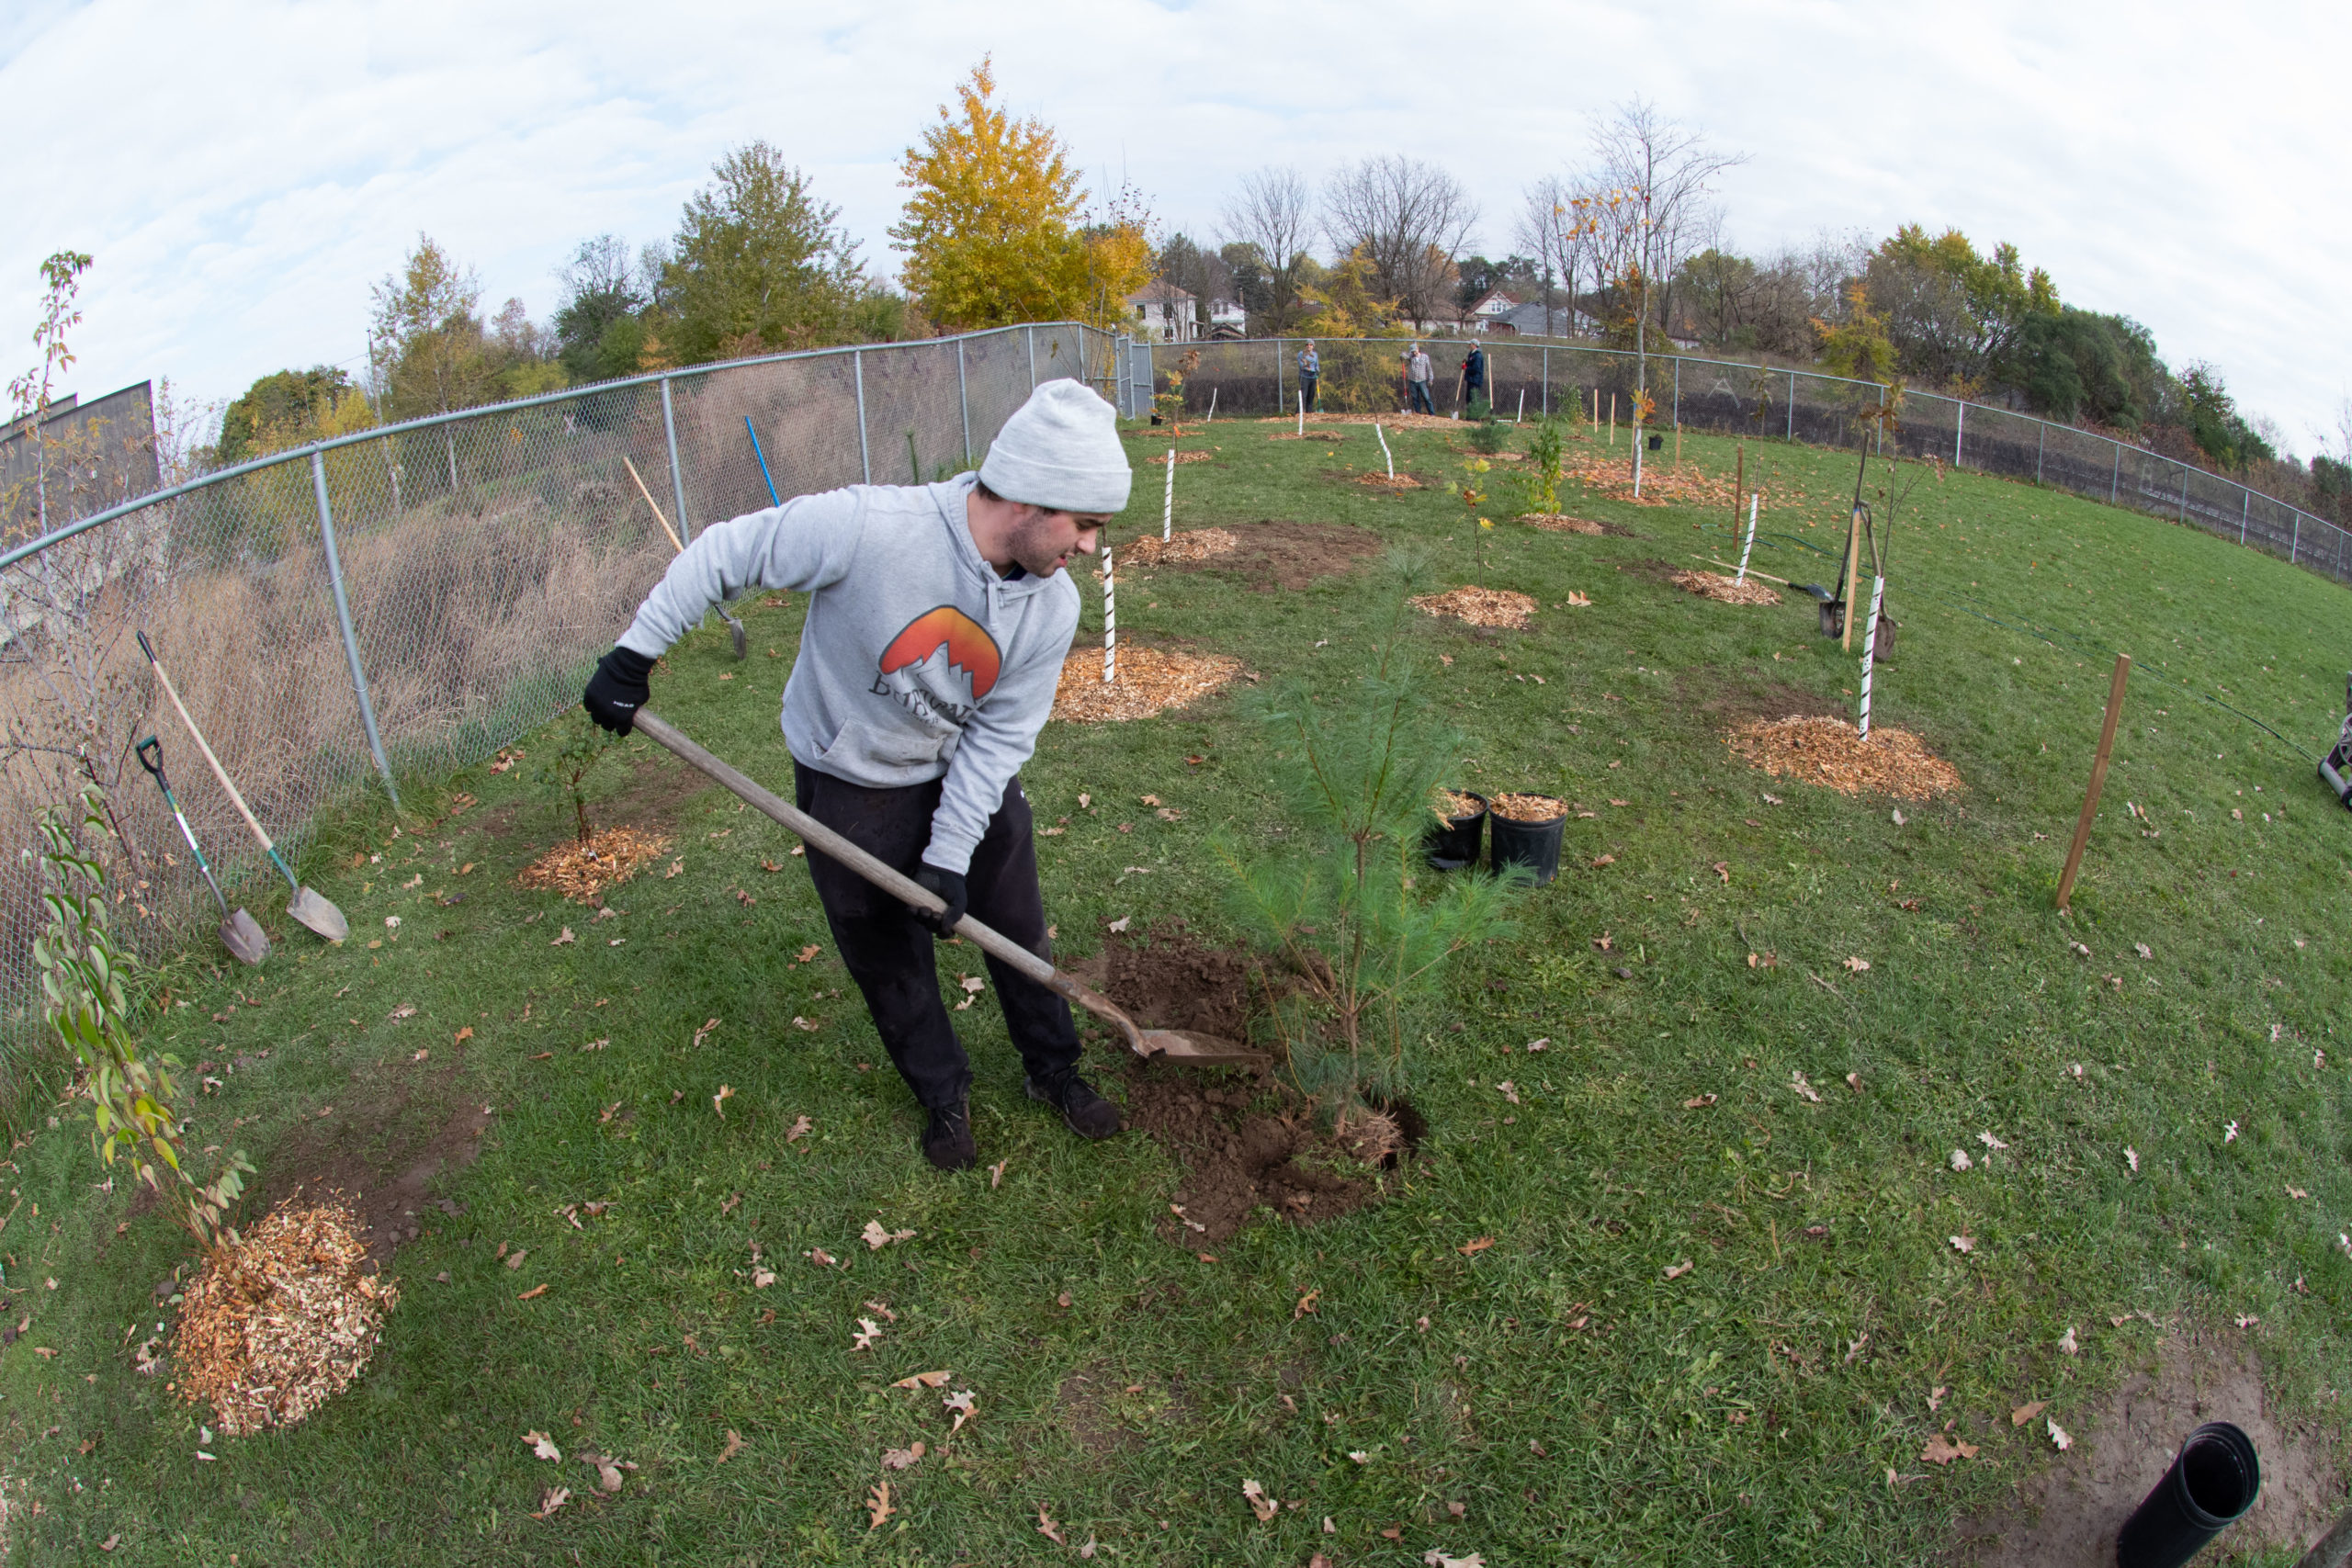 A wide angle photograph showing a volunteer working on digging a whole, surrounded by freshly planted trees.